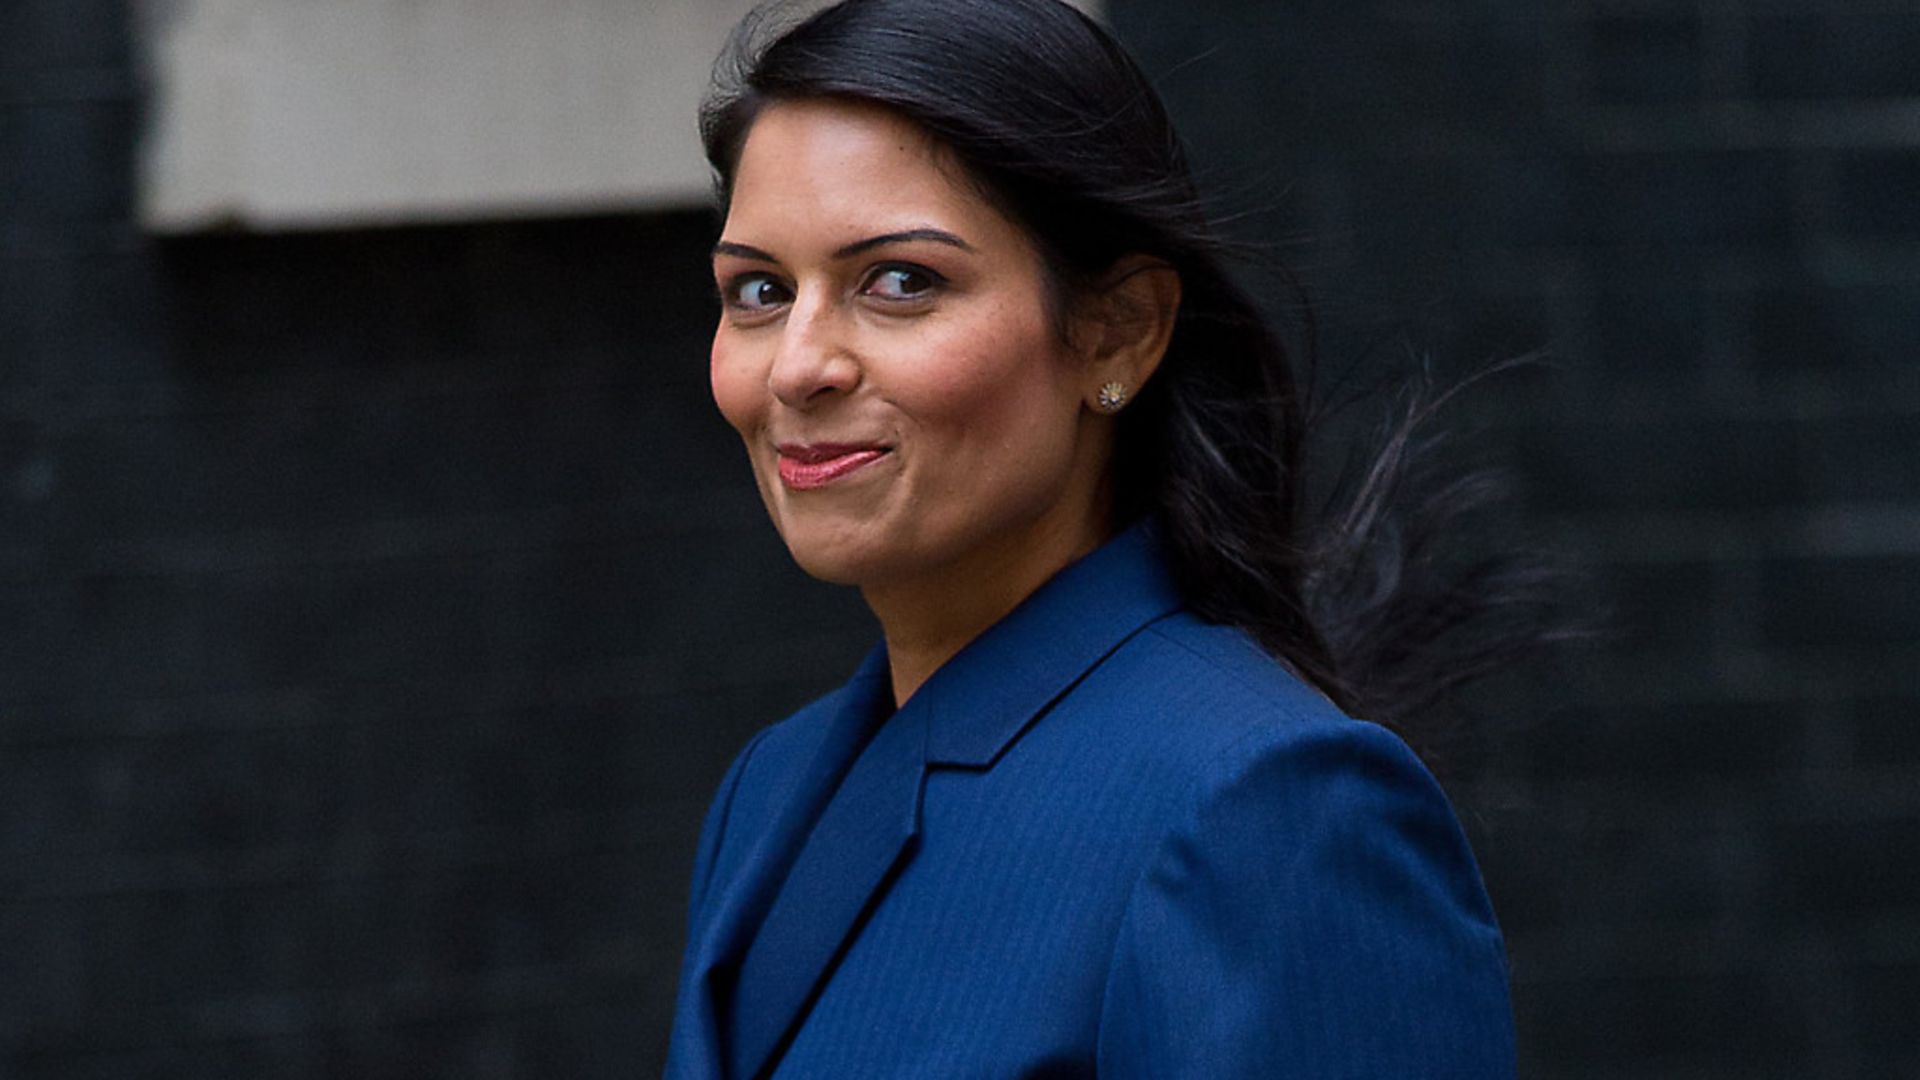 Home secretary Priti Patel had originally said processing asylum seekers on offshore centres in Ascension and St Helena was too expensive and logistically difficult - Credit: Ben Pruchnie/Getty Images